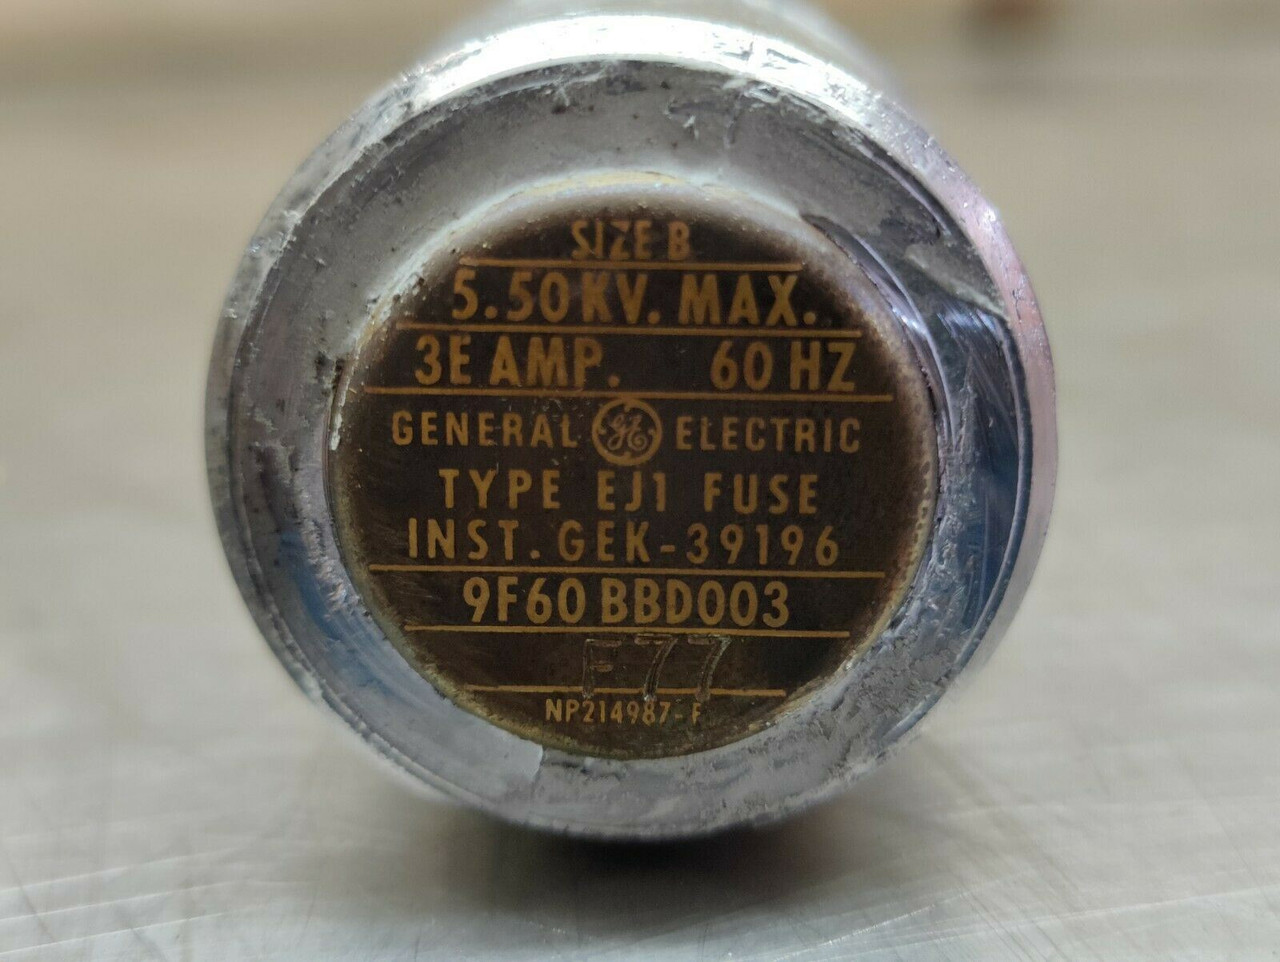 Current Limiting Fuse Type EJ1 9F60BBD003 General Electric 5.5kV, 3E Amps, 60Hz